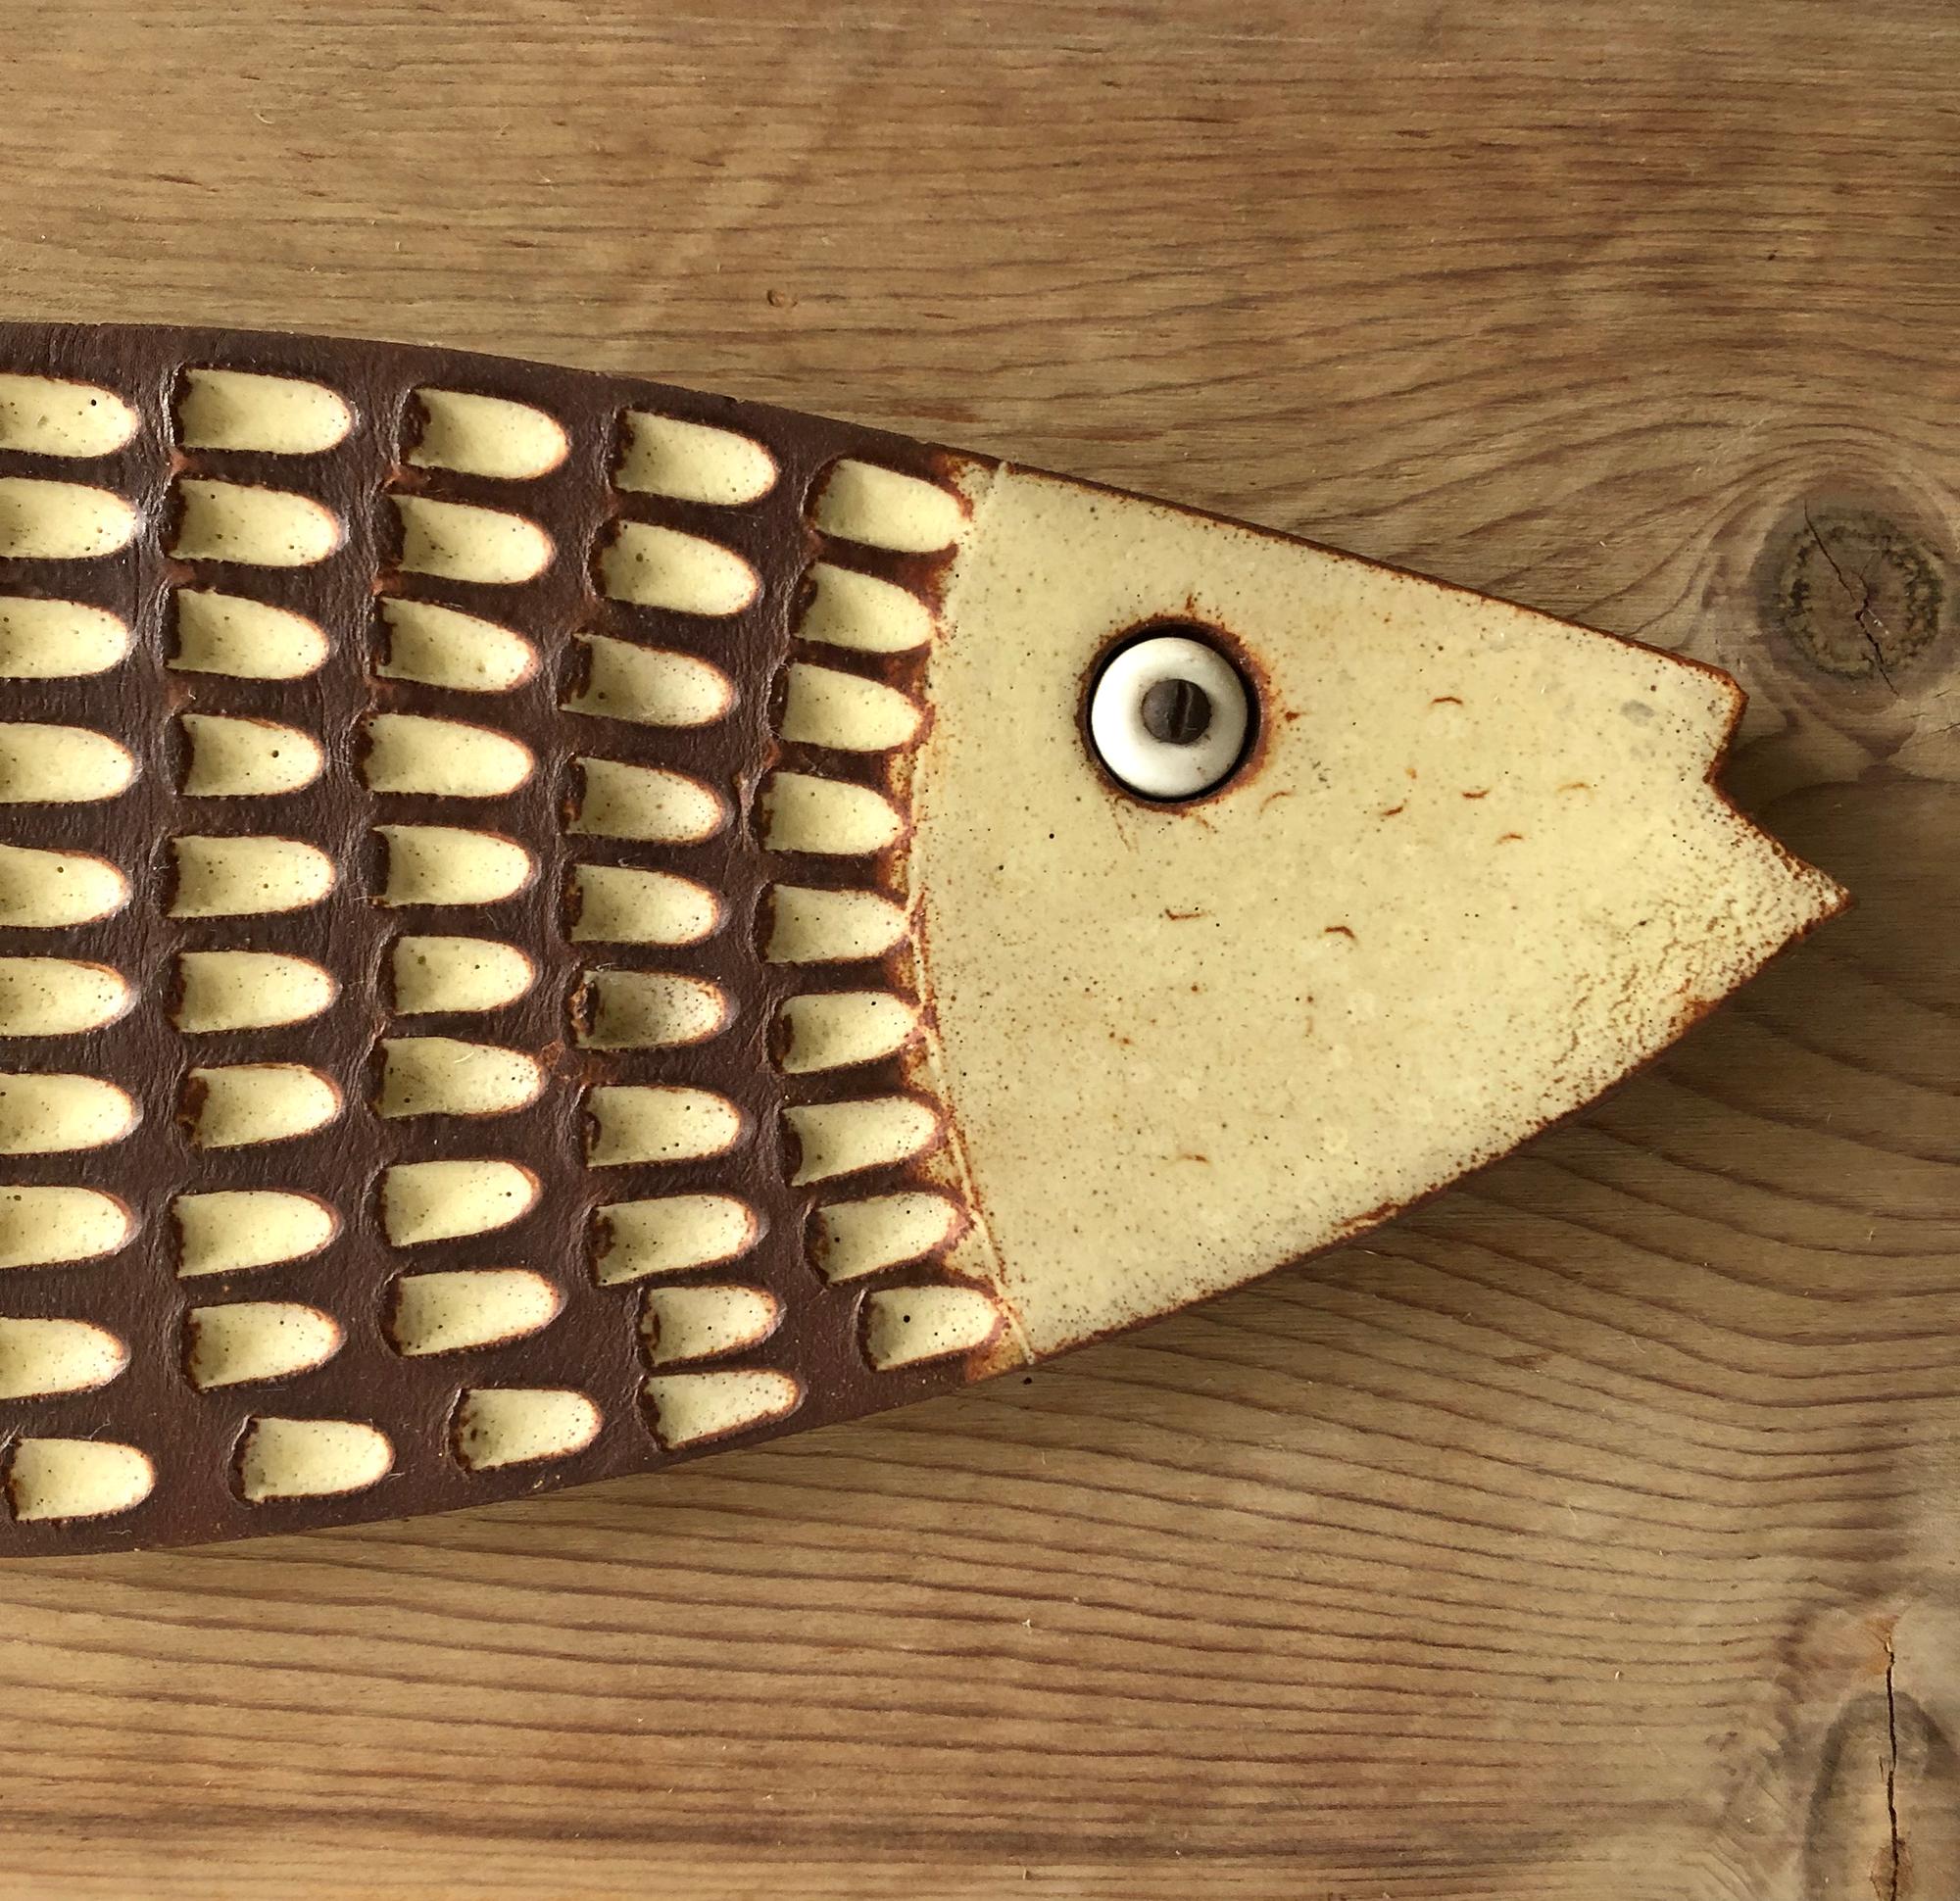 Ceramic fish plaque sculpture created by Doyle Lane of Los Angeles, California. Reclaimed wood plaque measures 7.5